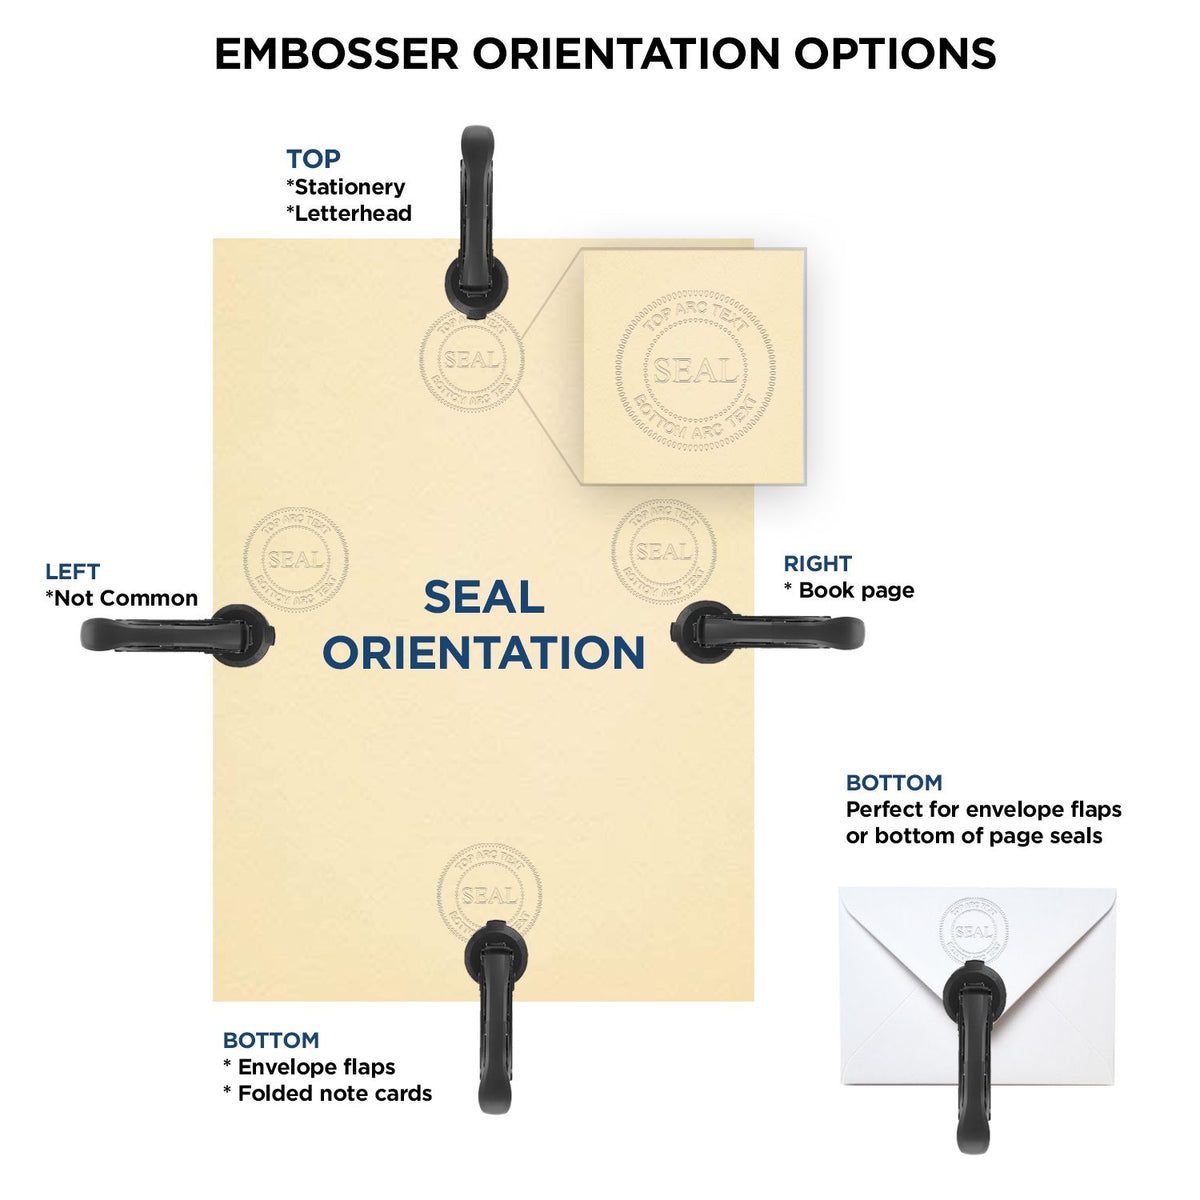 An infographic for the Extended Long Reach Louisiana Surveyor Embosser showing embosser orientation, this is showing examples of a top, bottom, right and left insert.